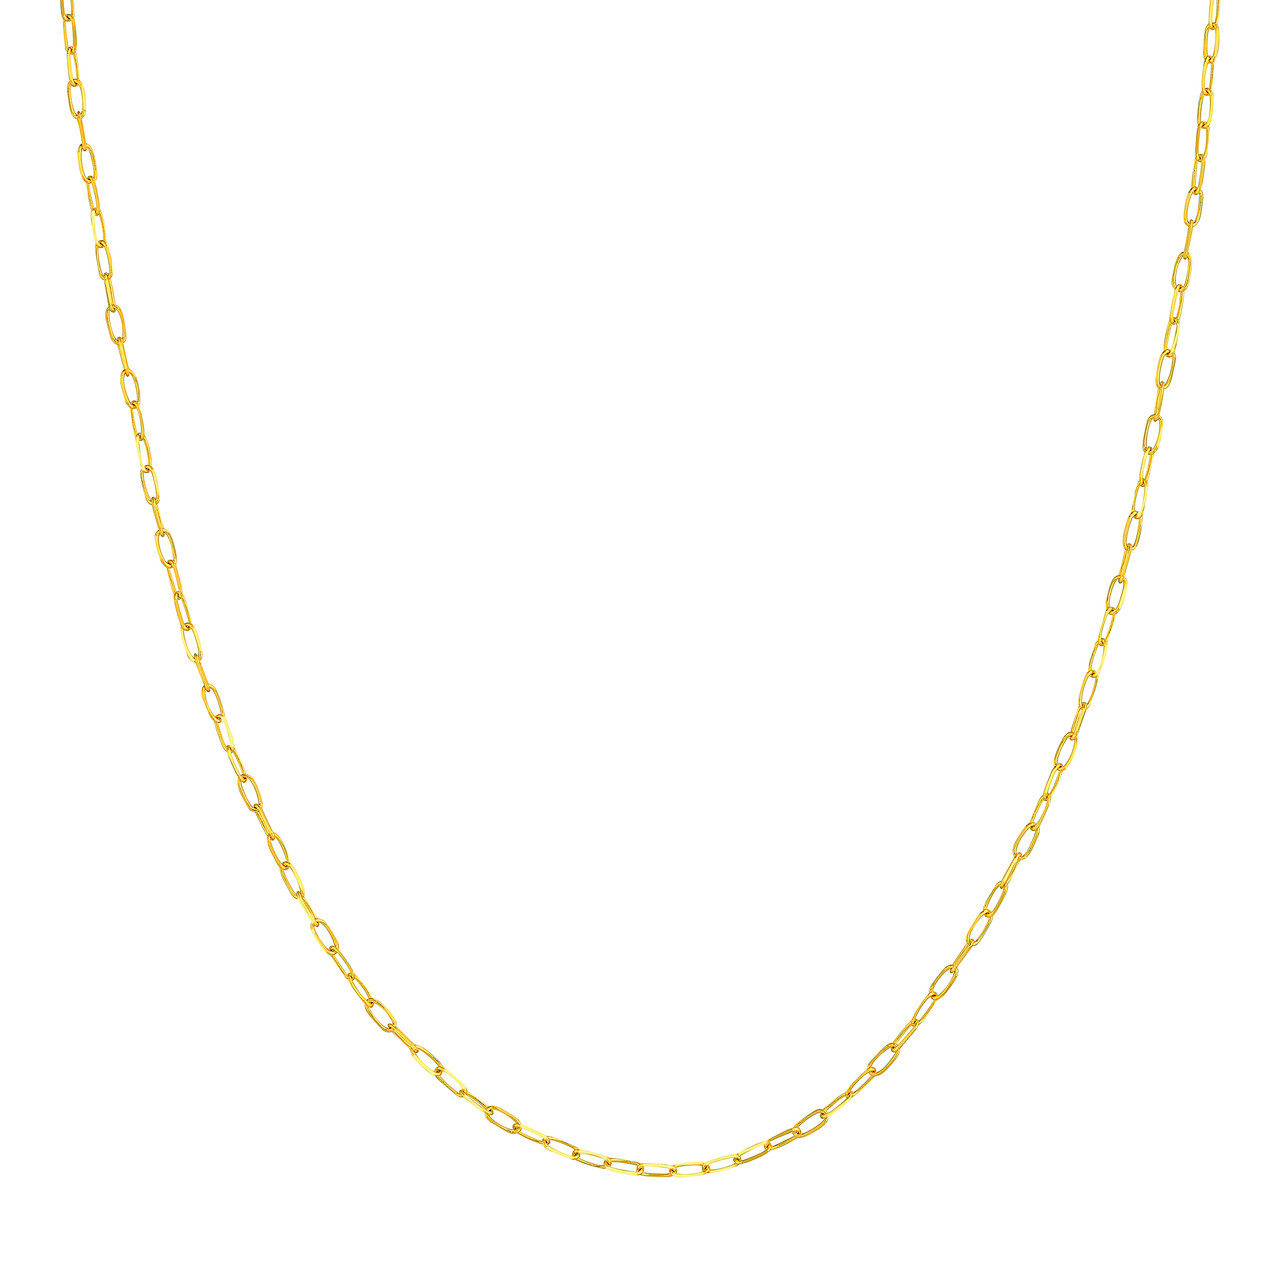 Yellow Gold Solid Petite1.7mm Paperclip Chain l 22 inches